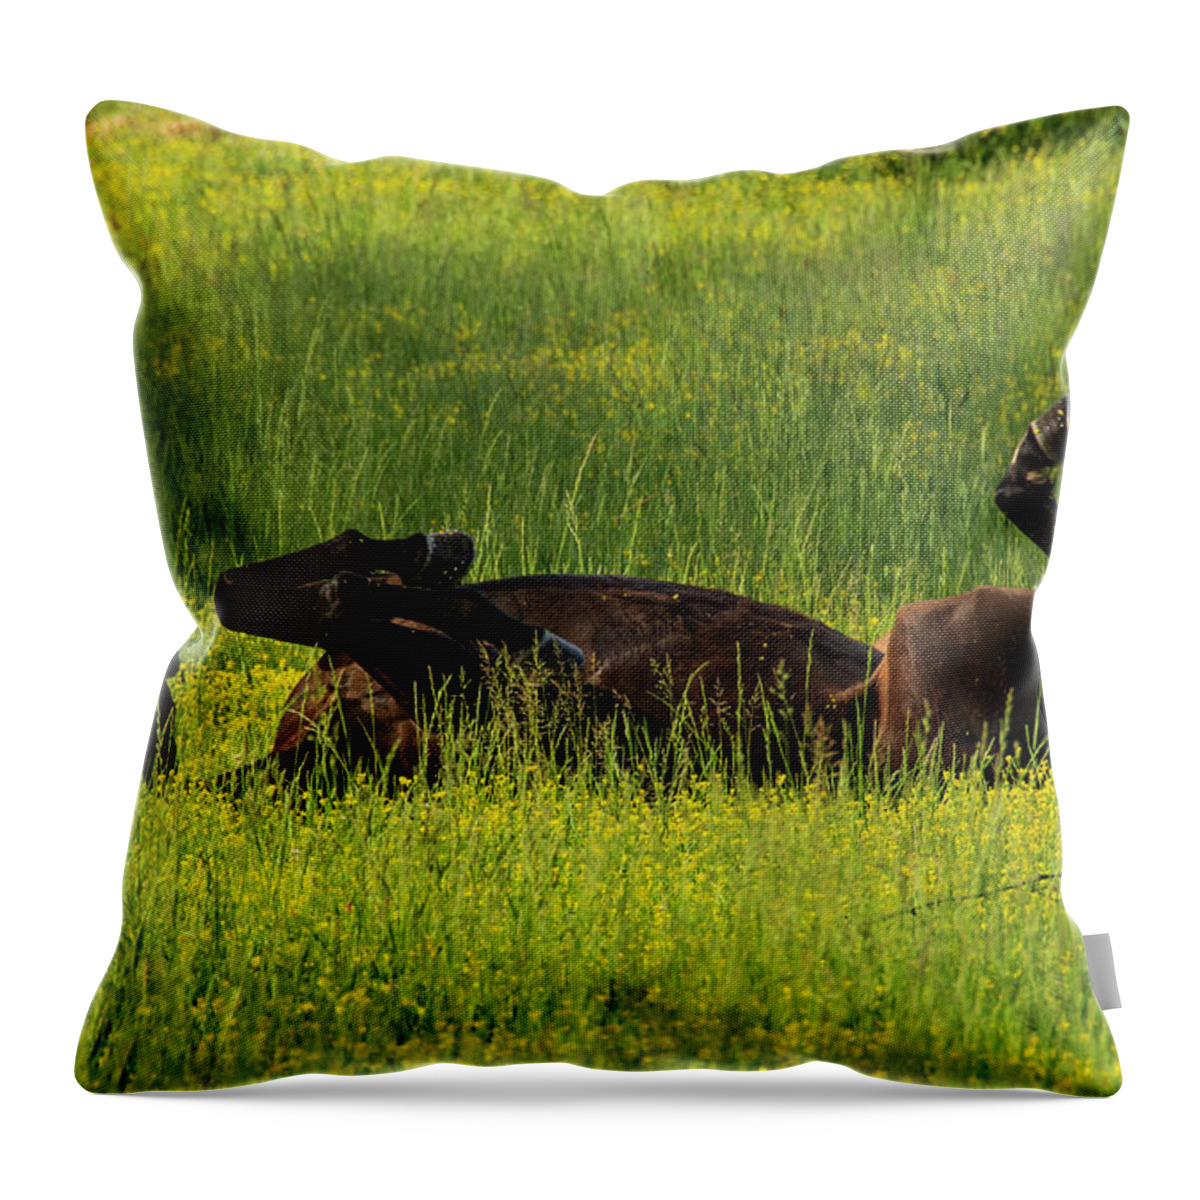 Great Smoky Mountains National Park Throw Pillow featuring the photograph Kick Up Your Feet by Melissa Southern